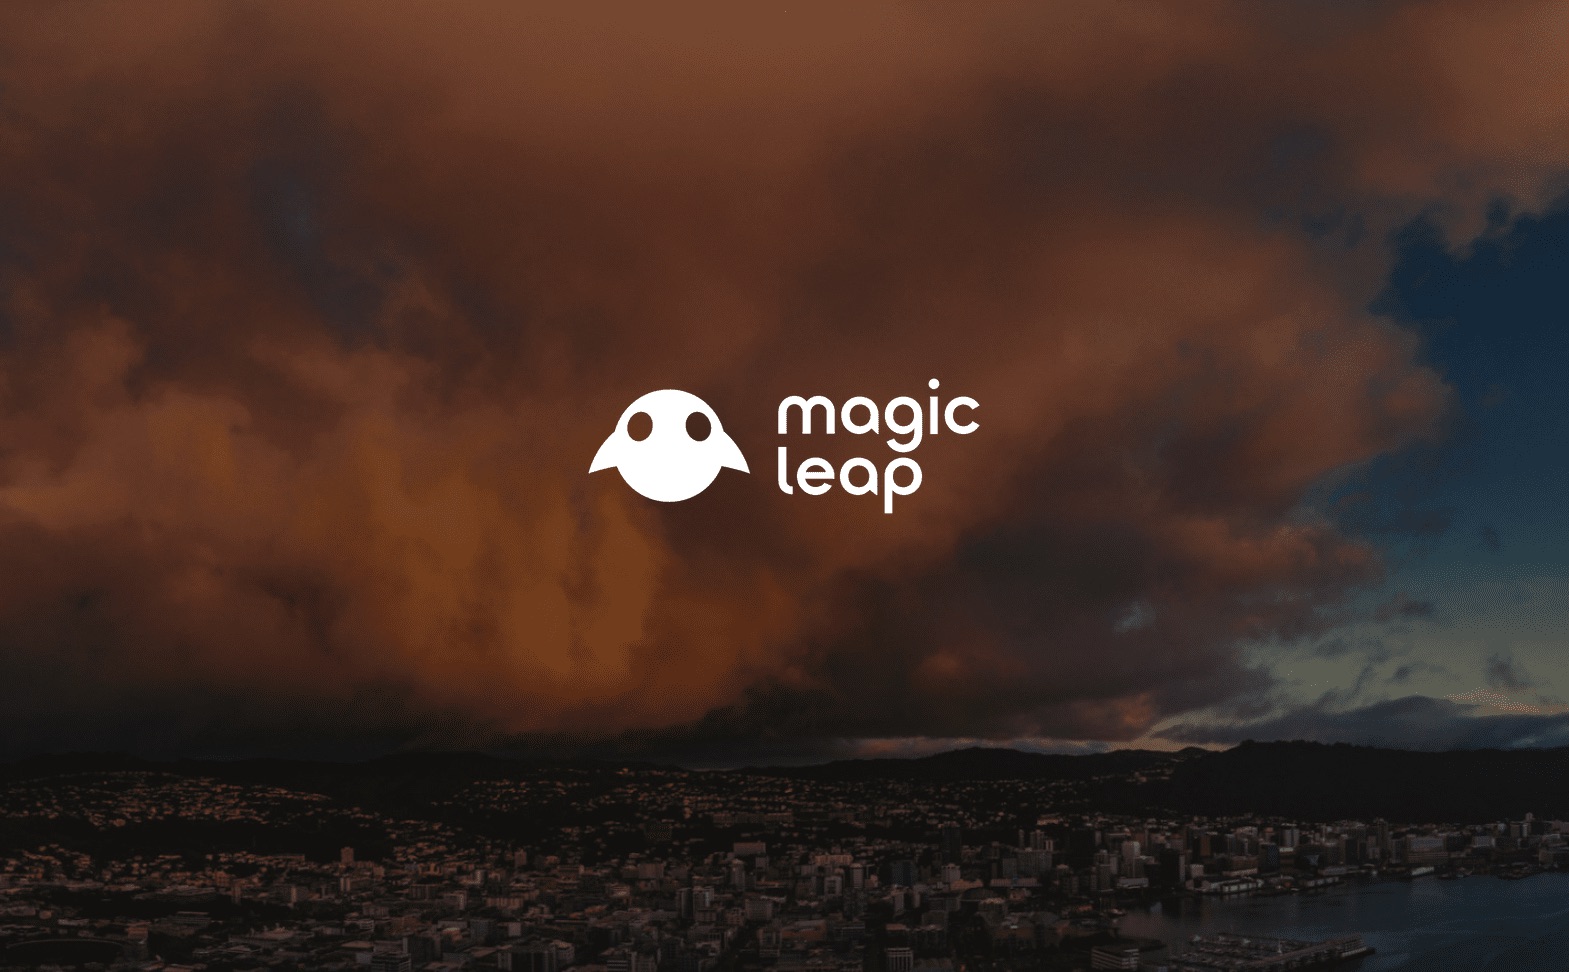 IU C&I Studios Page White Magic Leap Logo with graphic ghost image with reddish orange cloud over city in the background